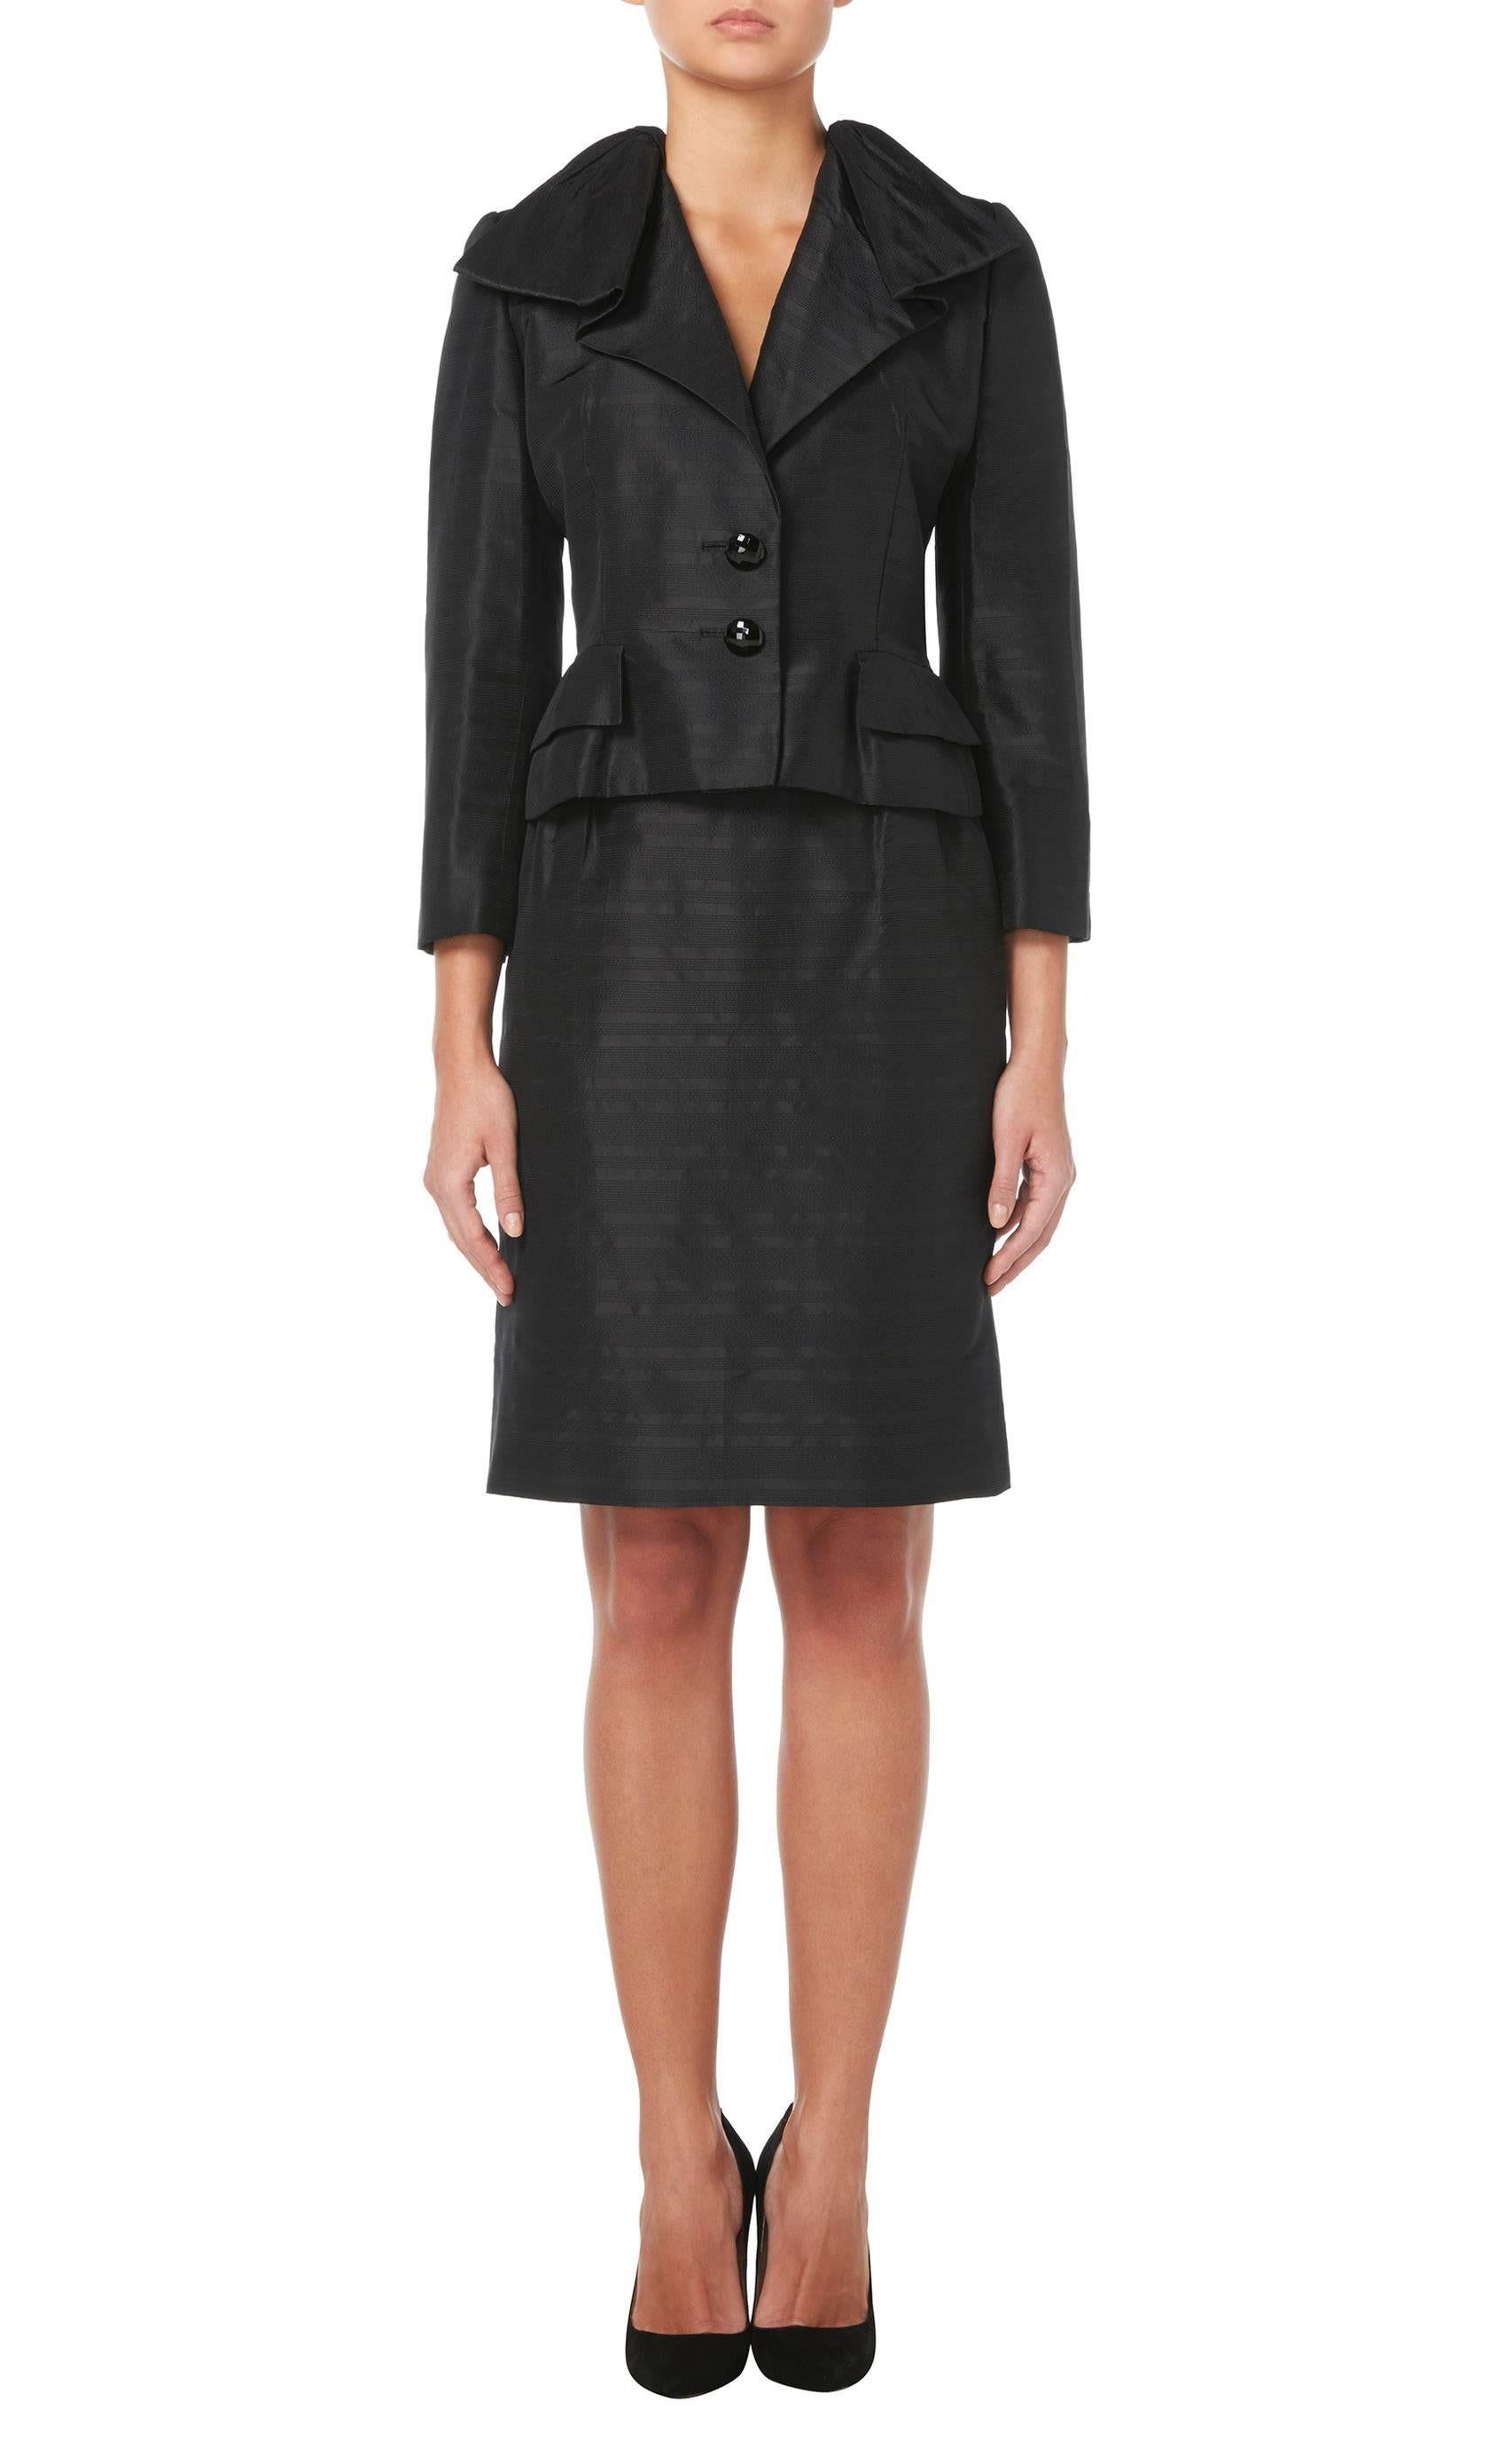 Whether for the office or an evening event, this Dior haute couture suit will look fabulous. Comprised of a jacket and in skirt in matching black silk, the jacket features a dramatic ruffle collar. Black faceted buttons to the front and cuffs of add